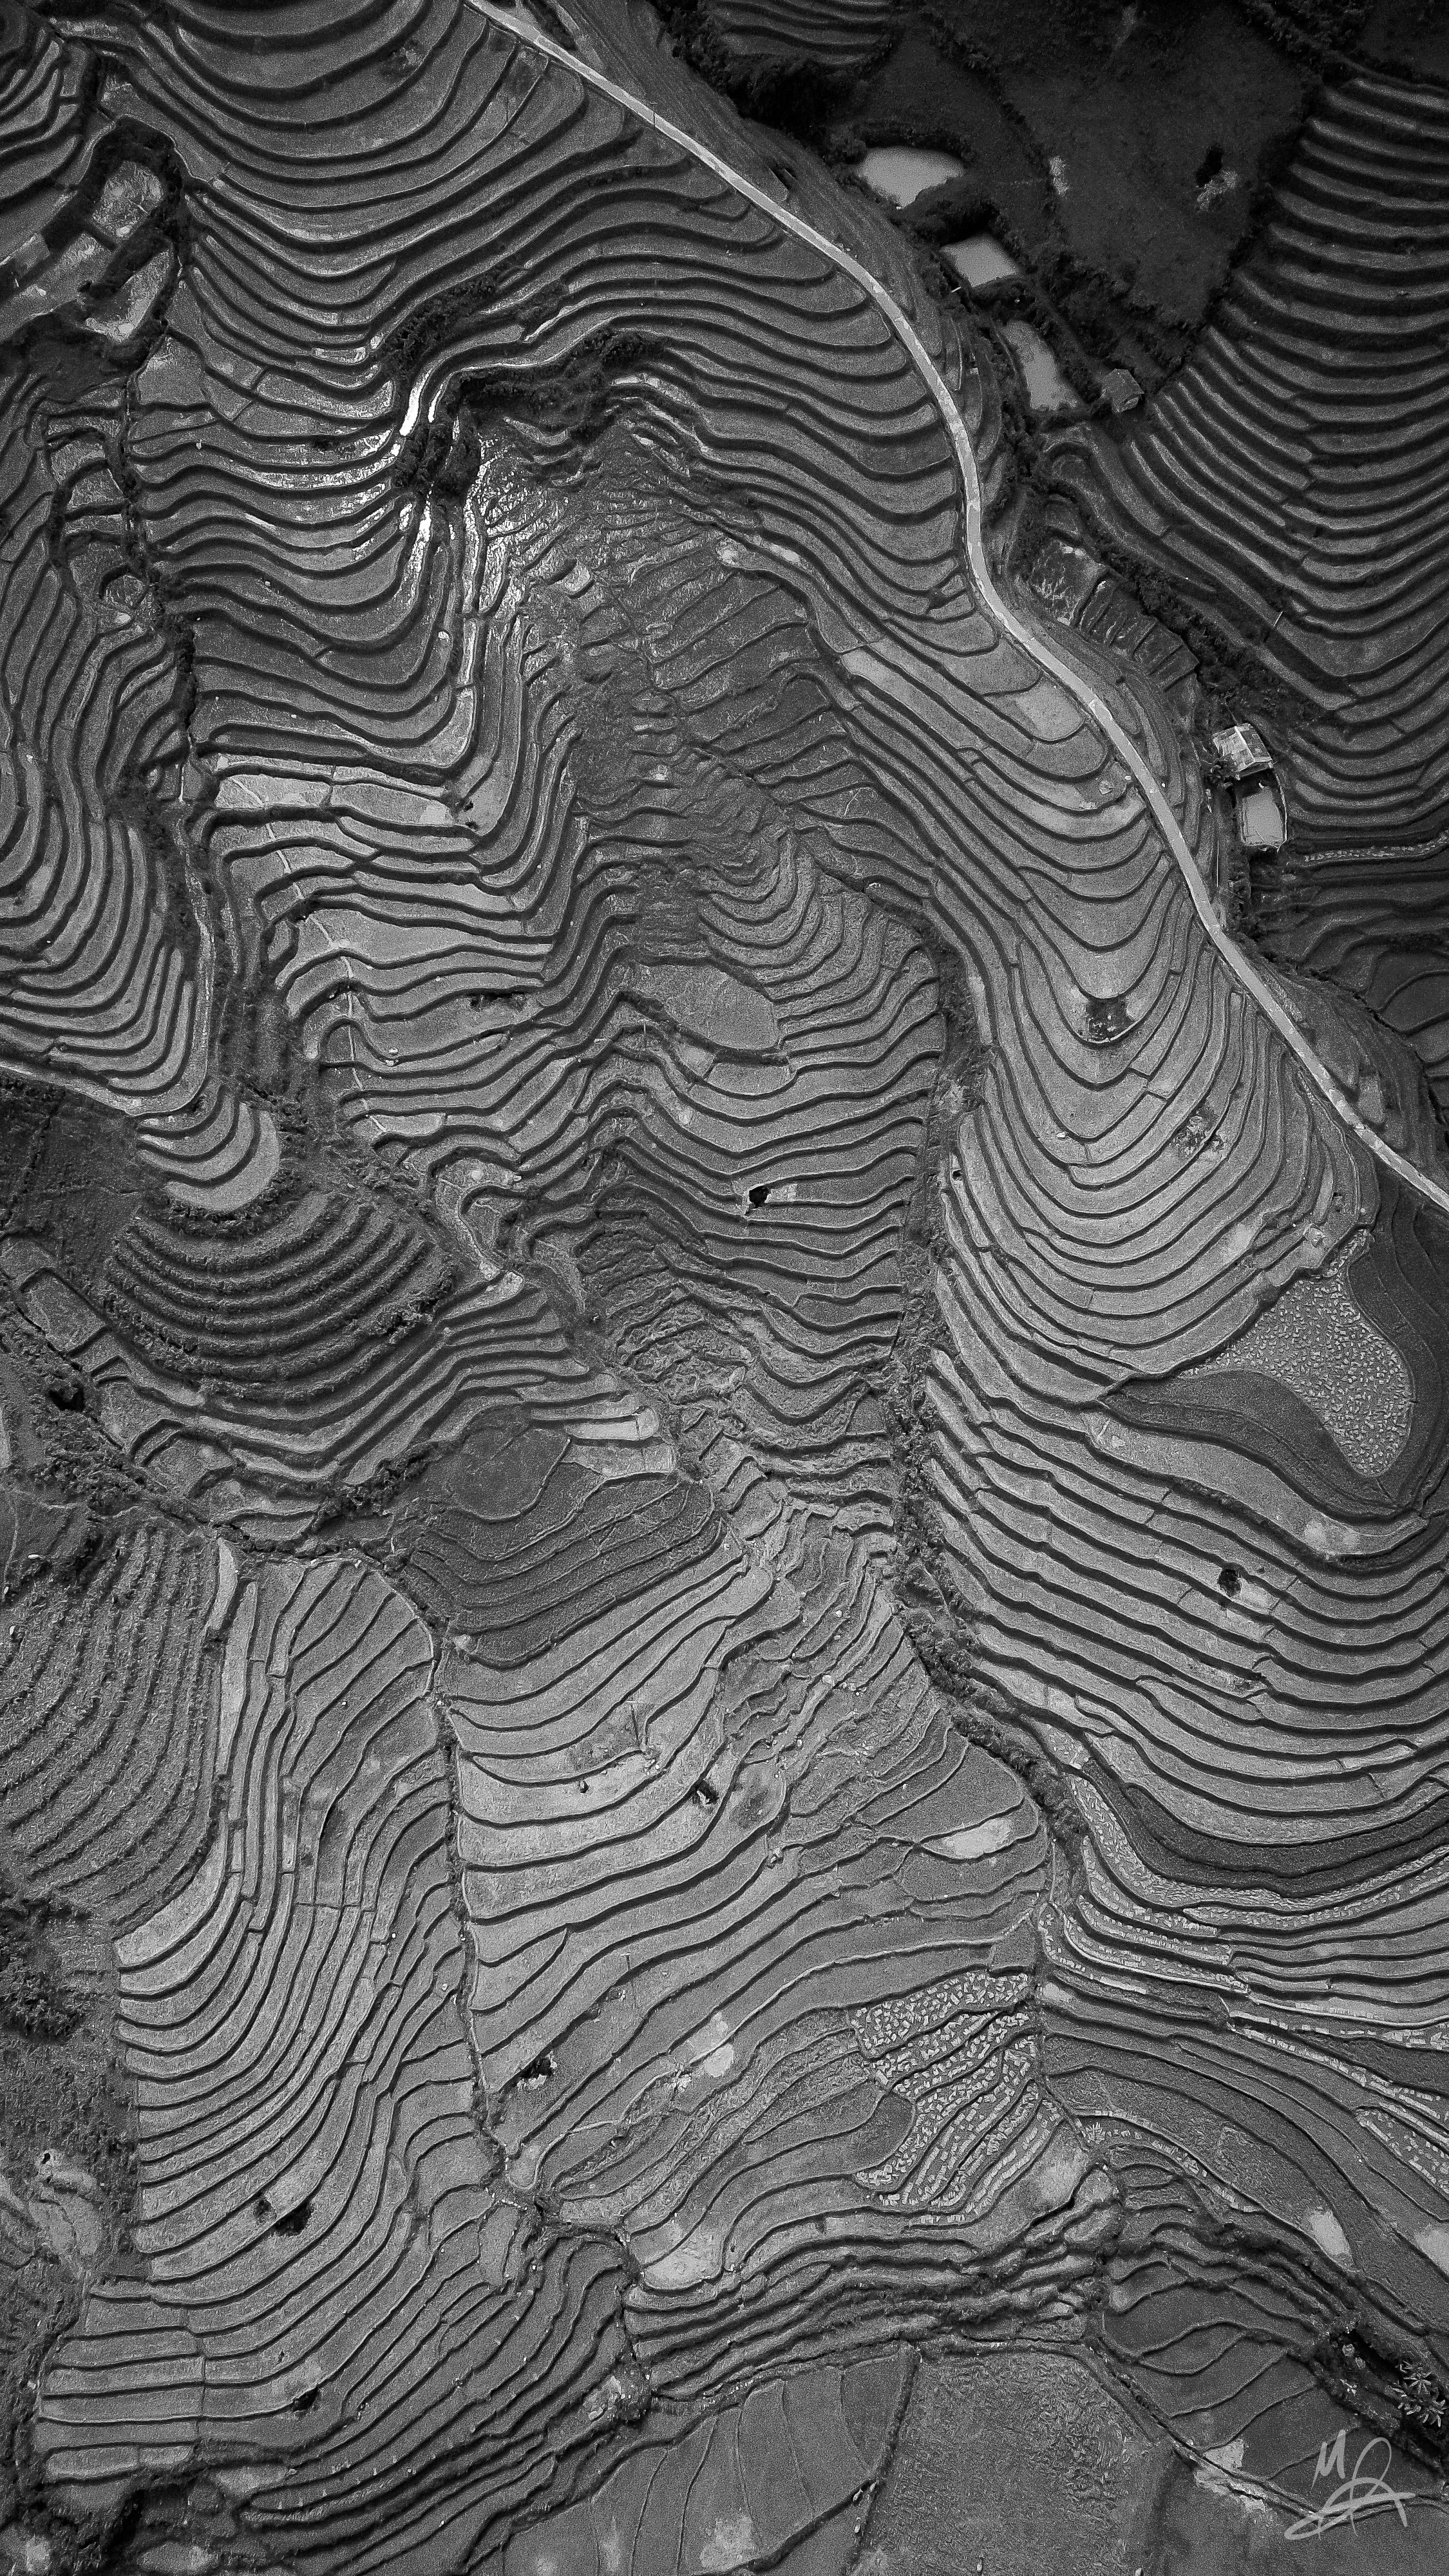 Wrinkles in the Land